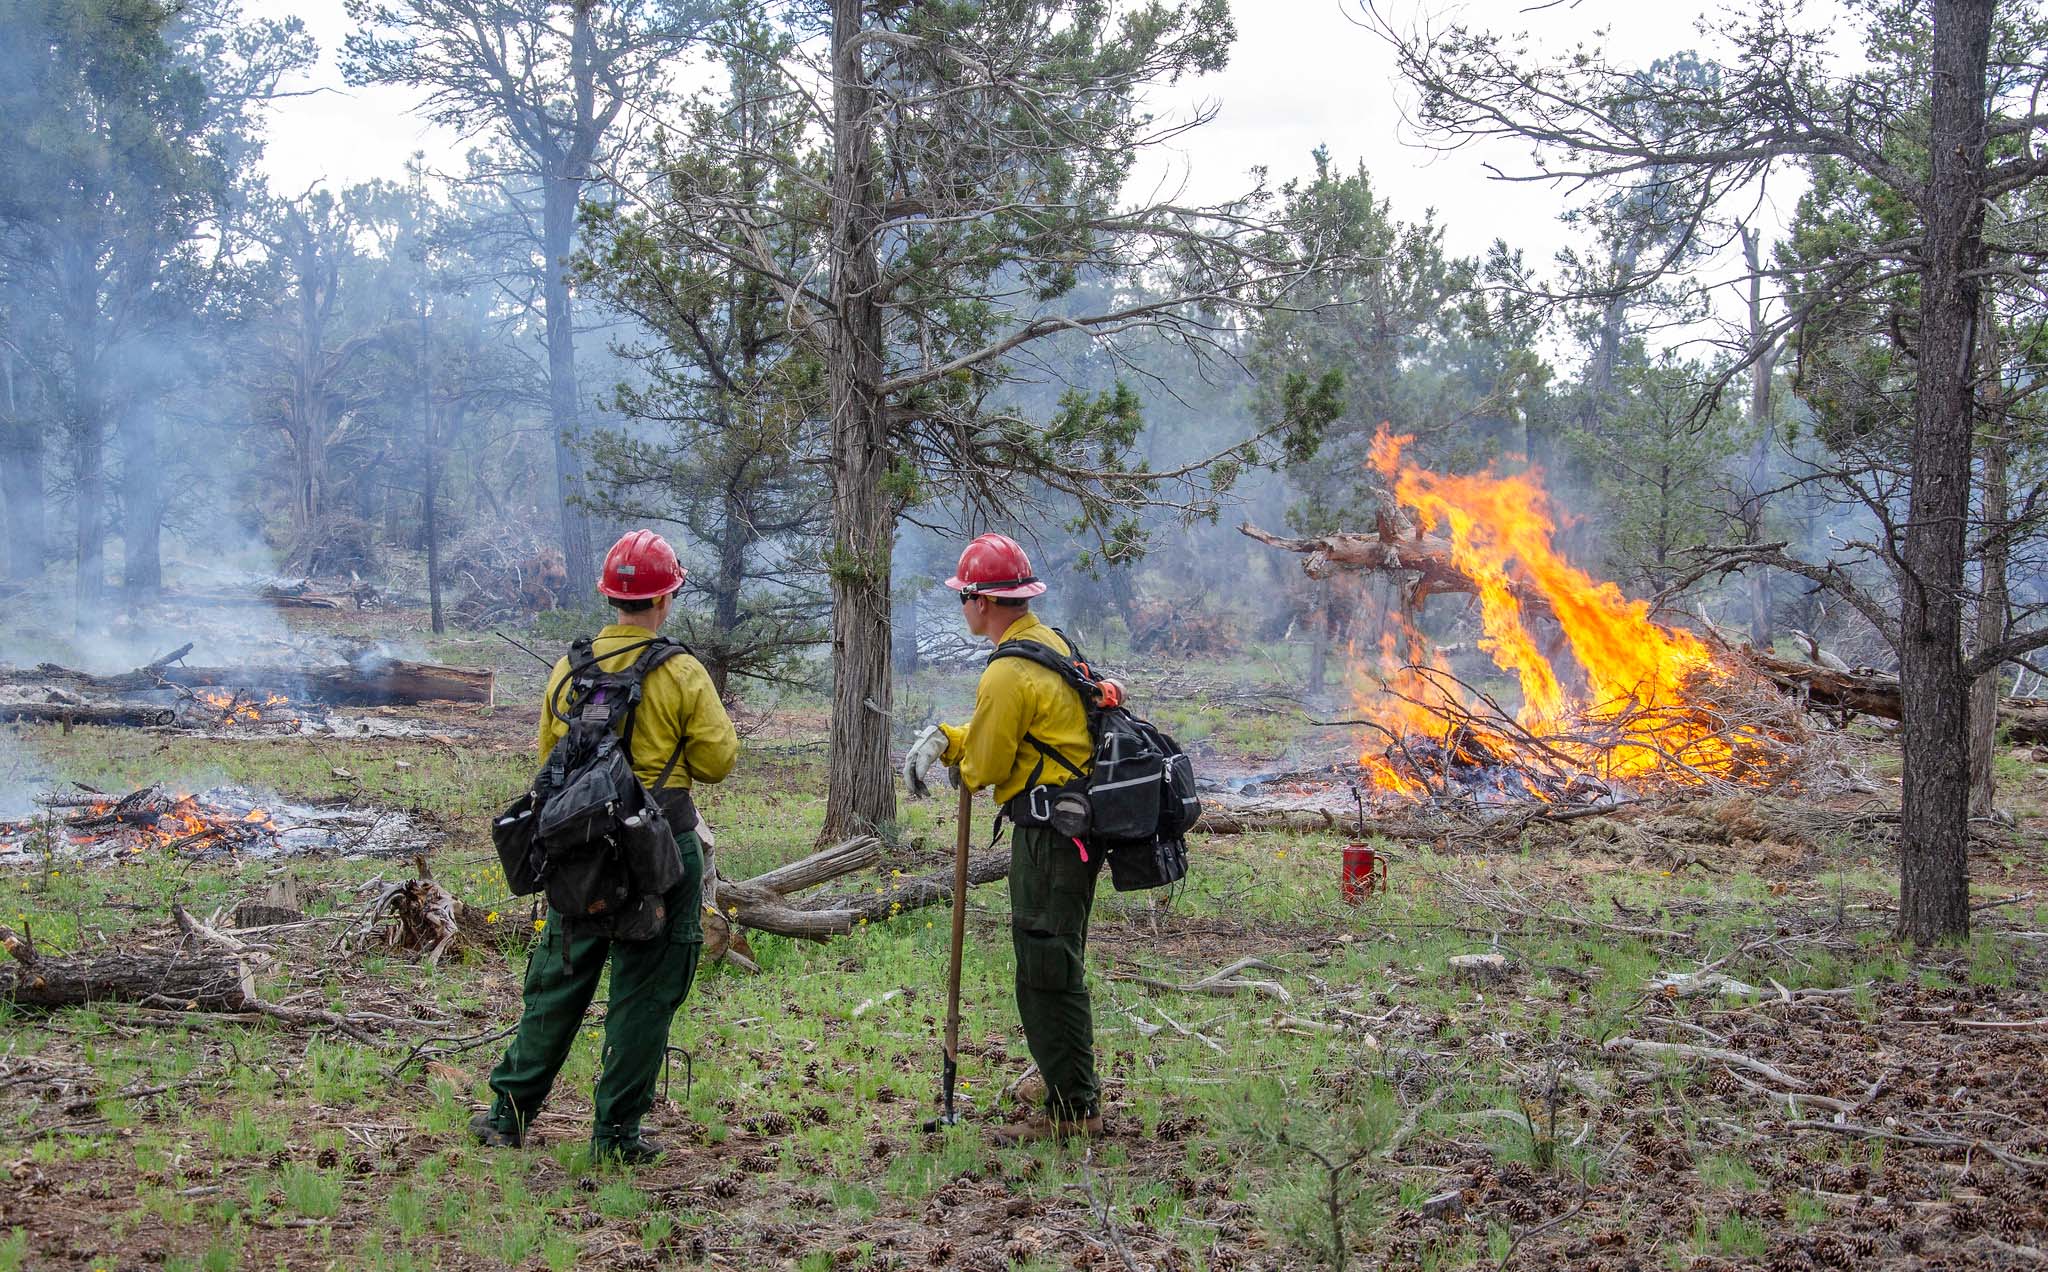 two people in firefighting gear standing in a forest clearing, watching piles of debris burn